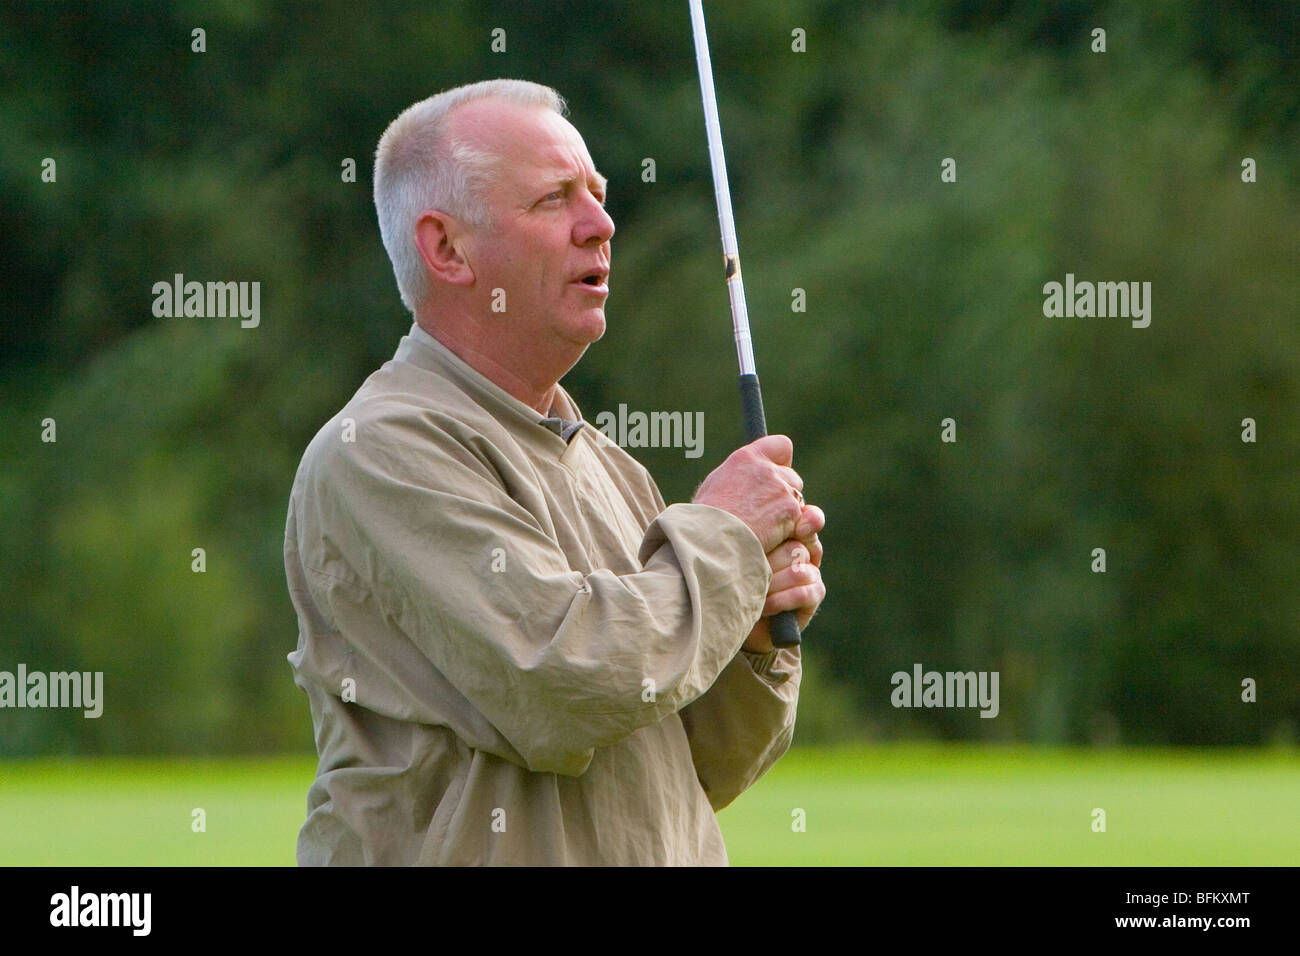 A middle aged white male playing golf watching his ball after taking a shot from the fairway Stock Photo